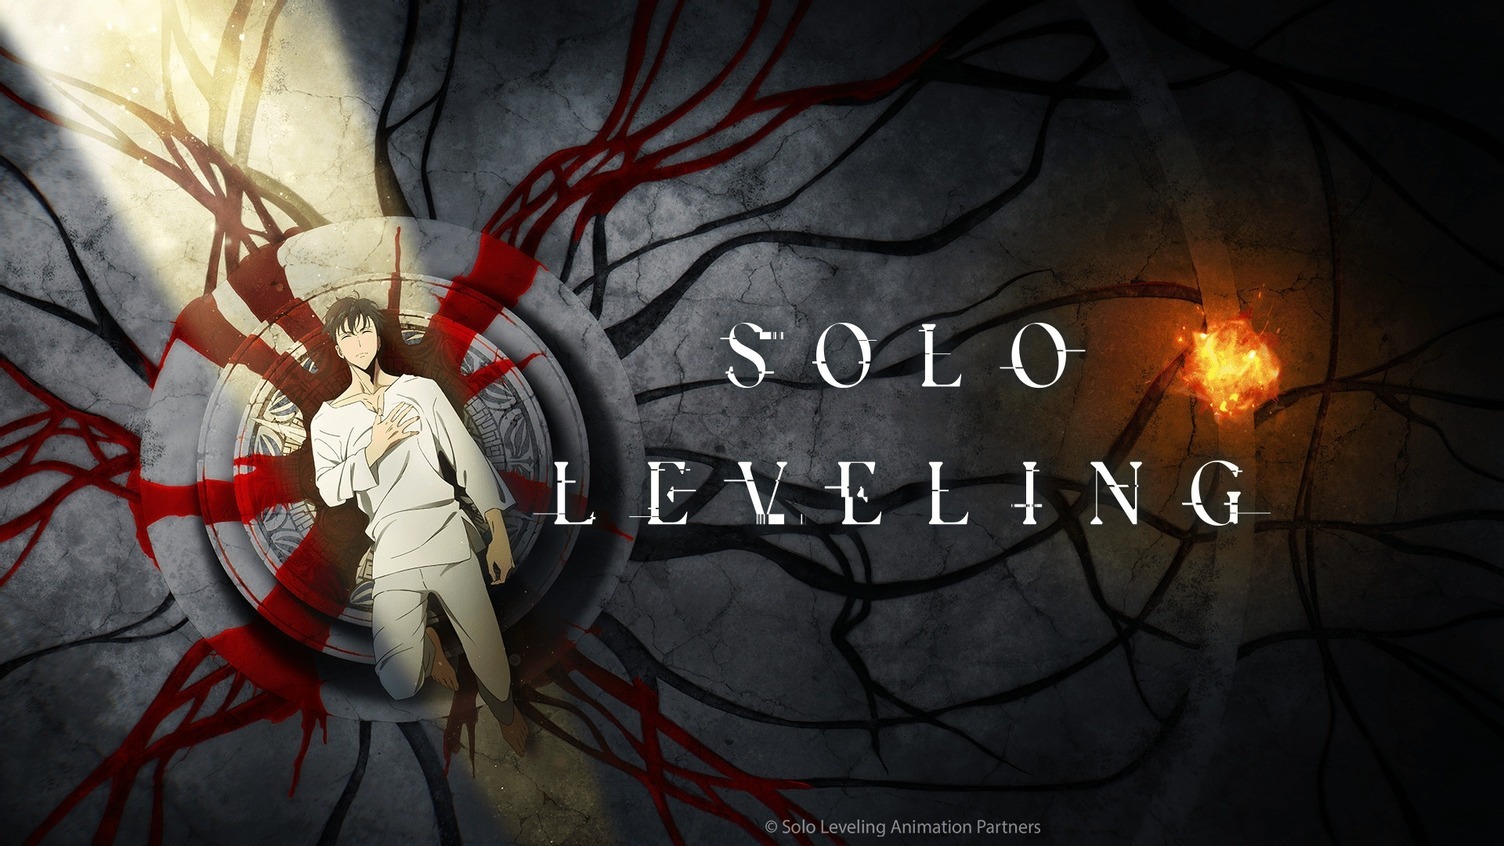 New Solo Leveling Anime Trailer Debuts at Anime Expo